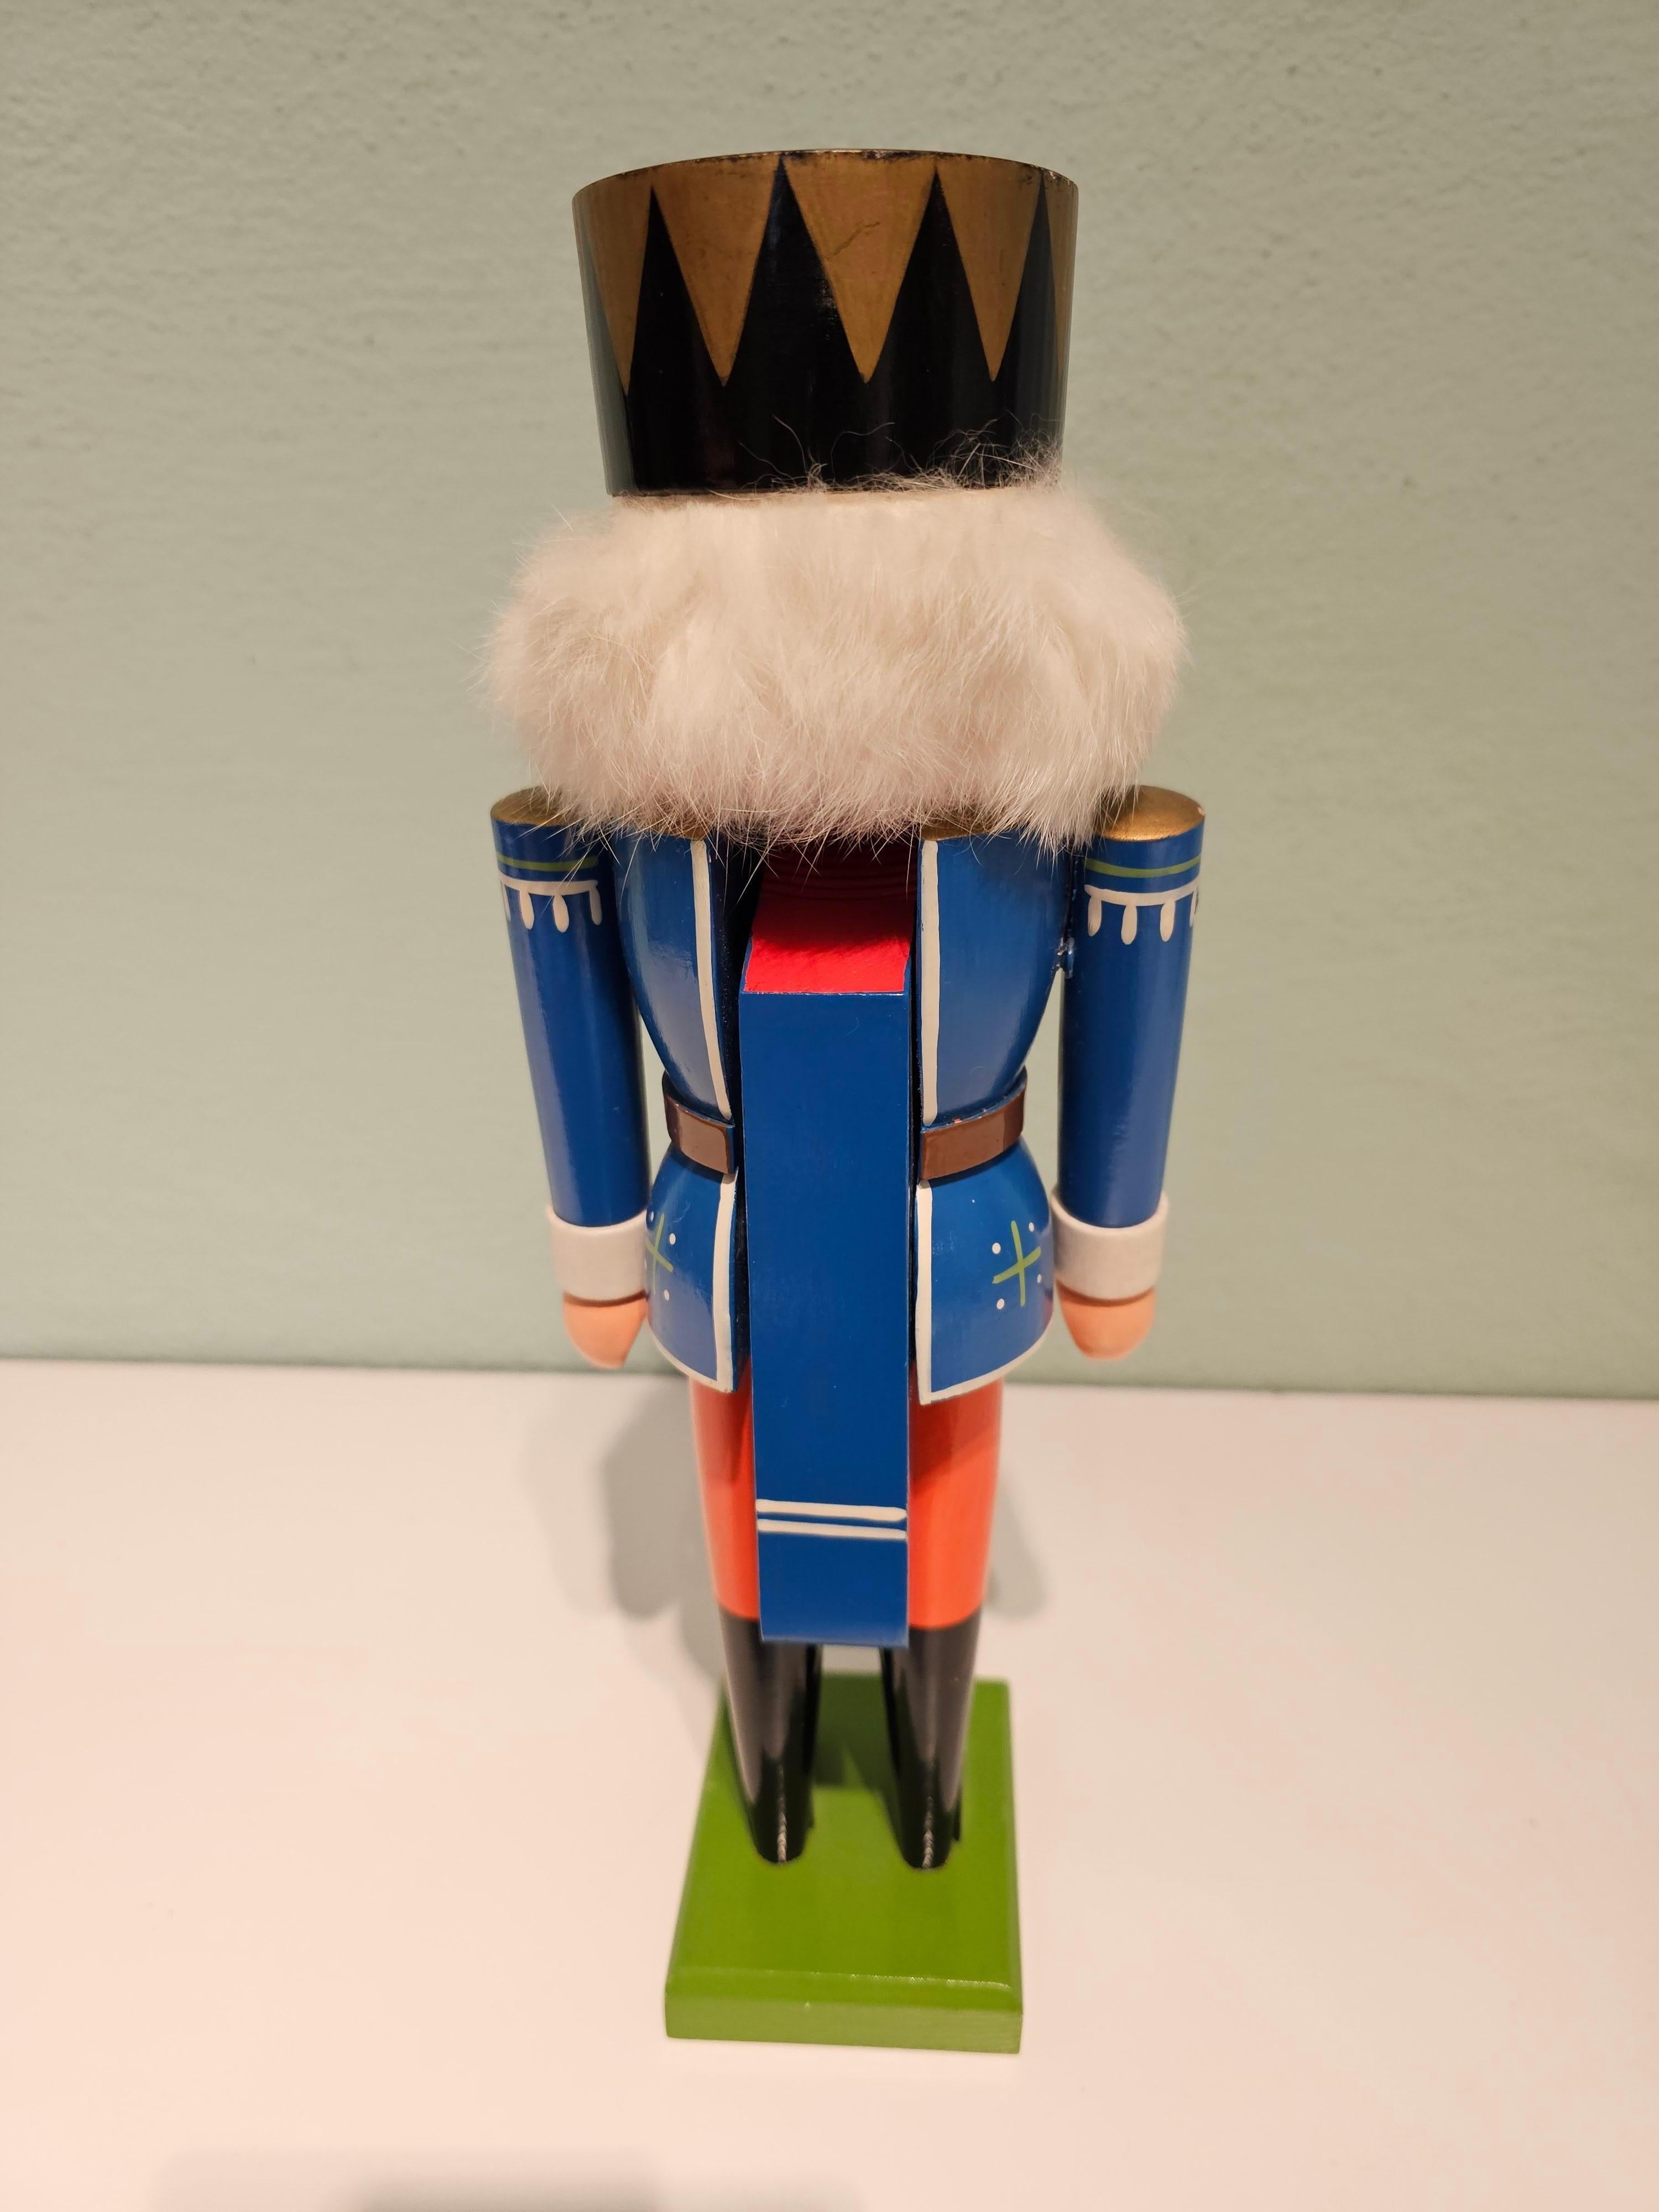 Vintage wooden nutcracker figure from the Erzgebirge. The region Erzgebirge formerly Eastern Germany is famous for this special kind of nutcrackers, where intricate carving has been their home. Completely hand-painted in red and blue colors and